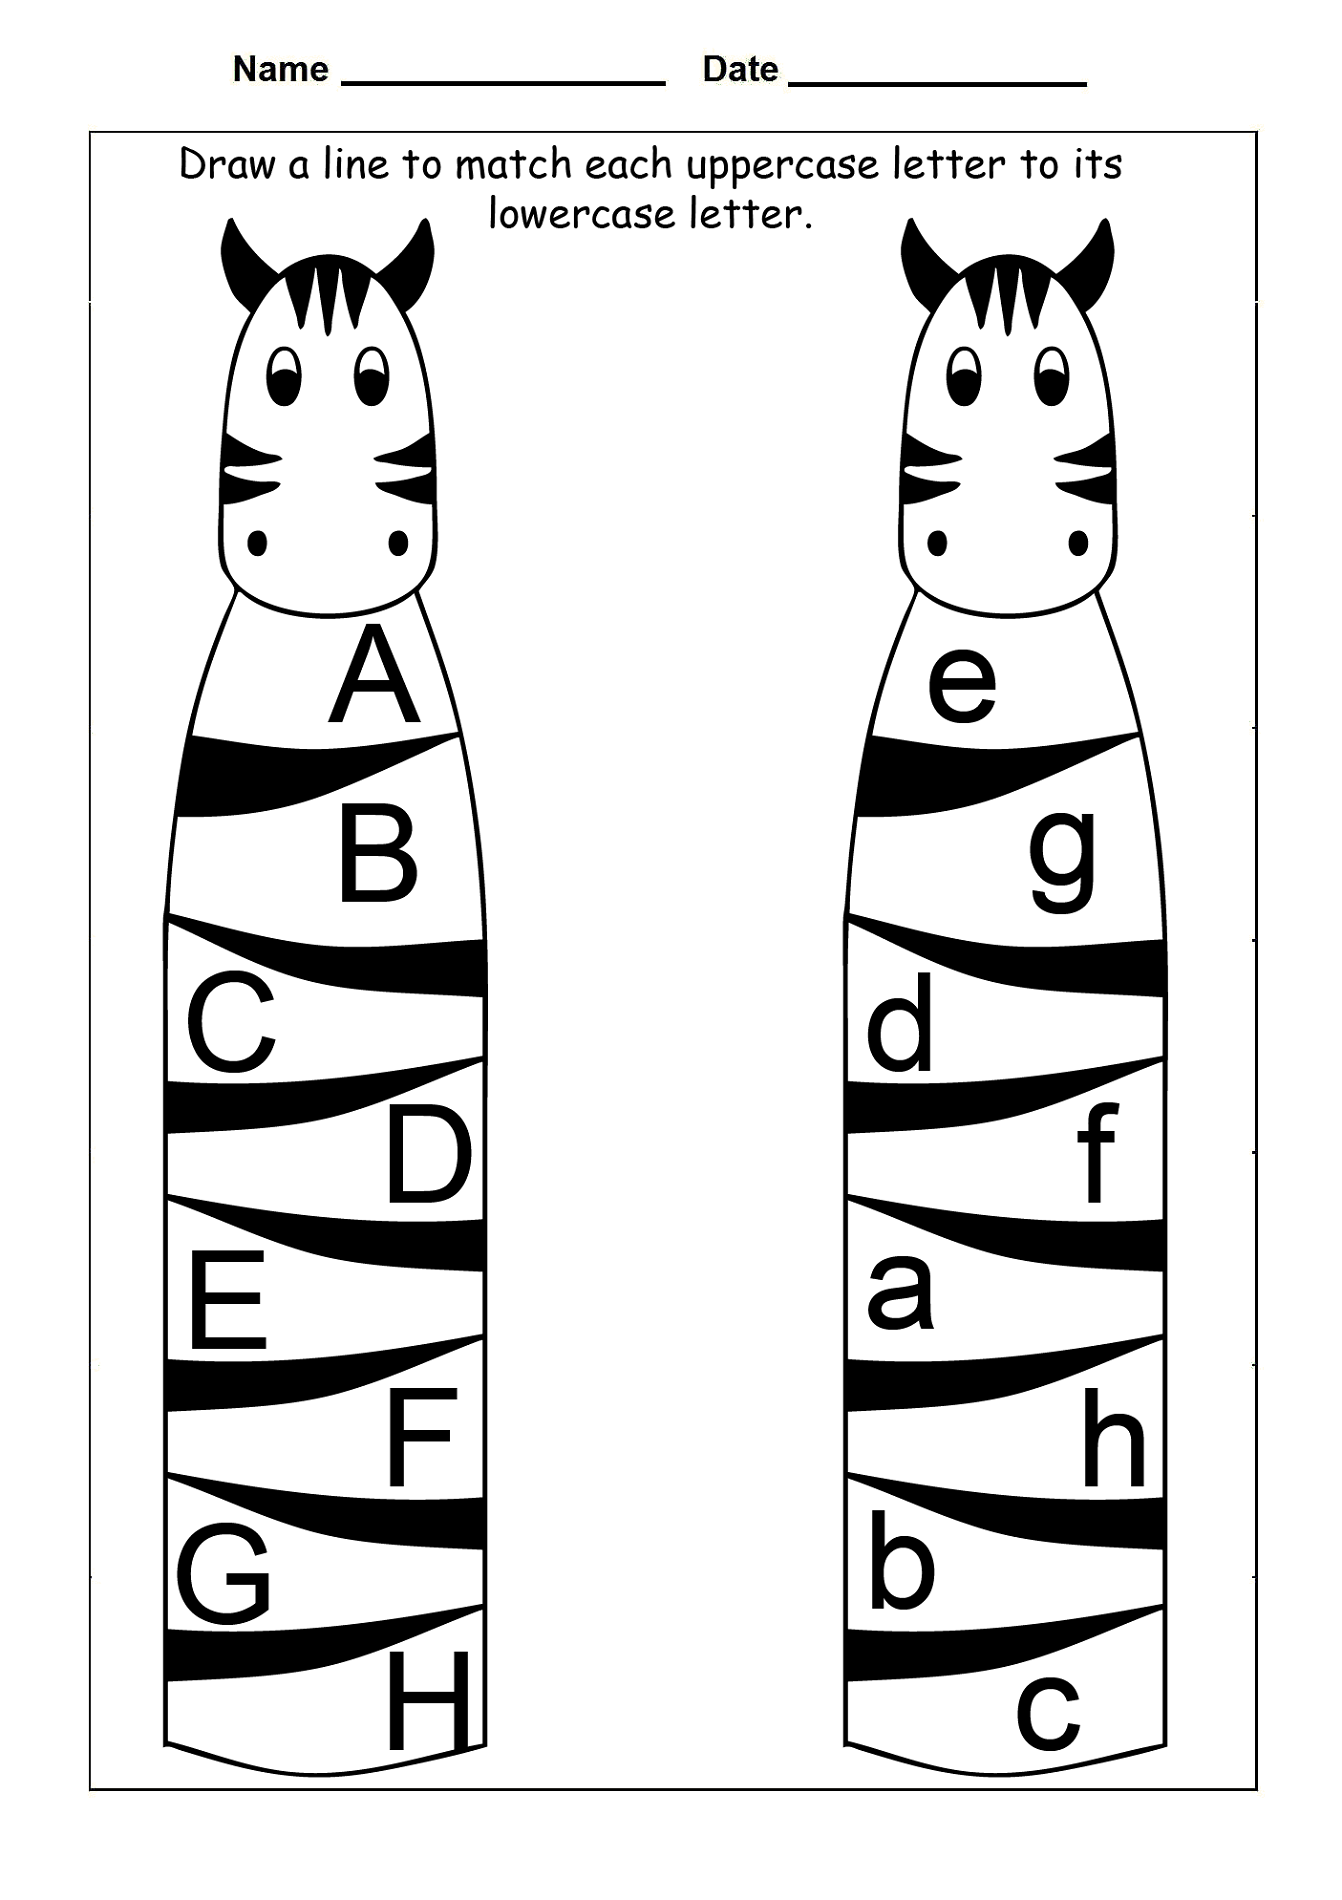 Matching Uppercase And Lowercase Letters Worksheet